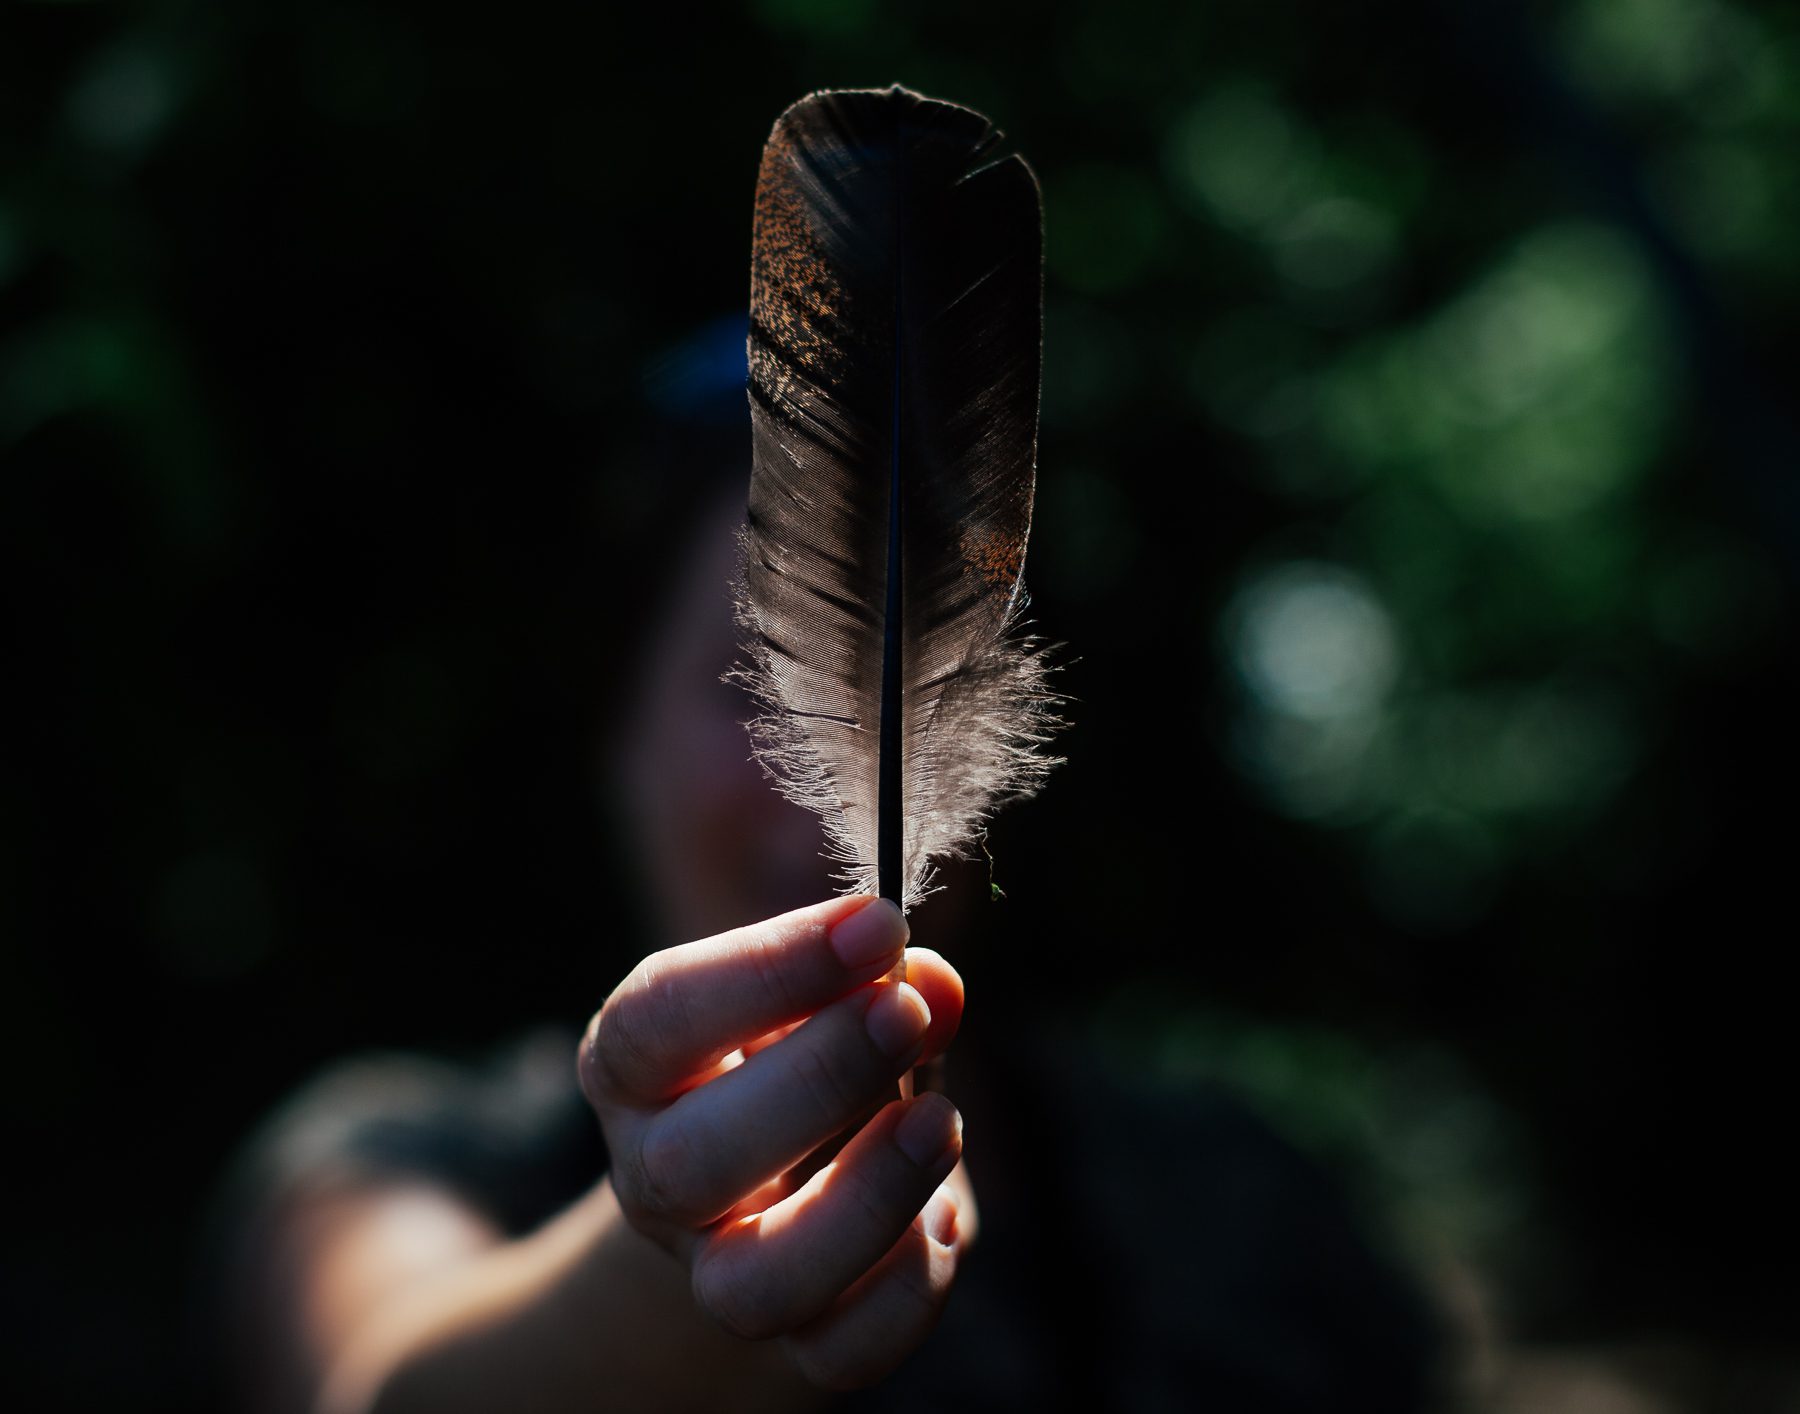 Heidi holds up a feather she found while hiking in Point Pelee National Park  — one of approximately 6,000 feathers found on the average wild turkey.  Wild turkeys were extirpated (locally extinct) from Ontario as a result of habitat loss and overhunting. Reintroduction efforts began in the 80s, and the species is now common in southern Ontario.